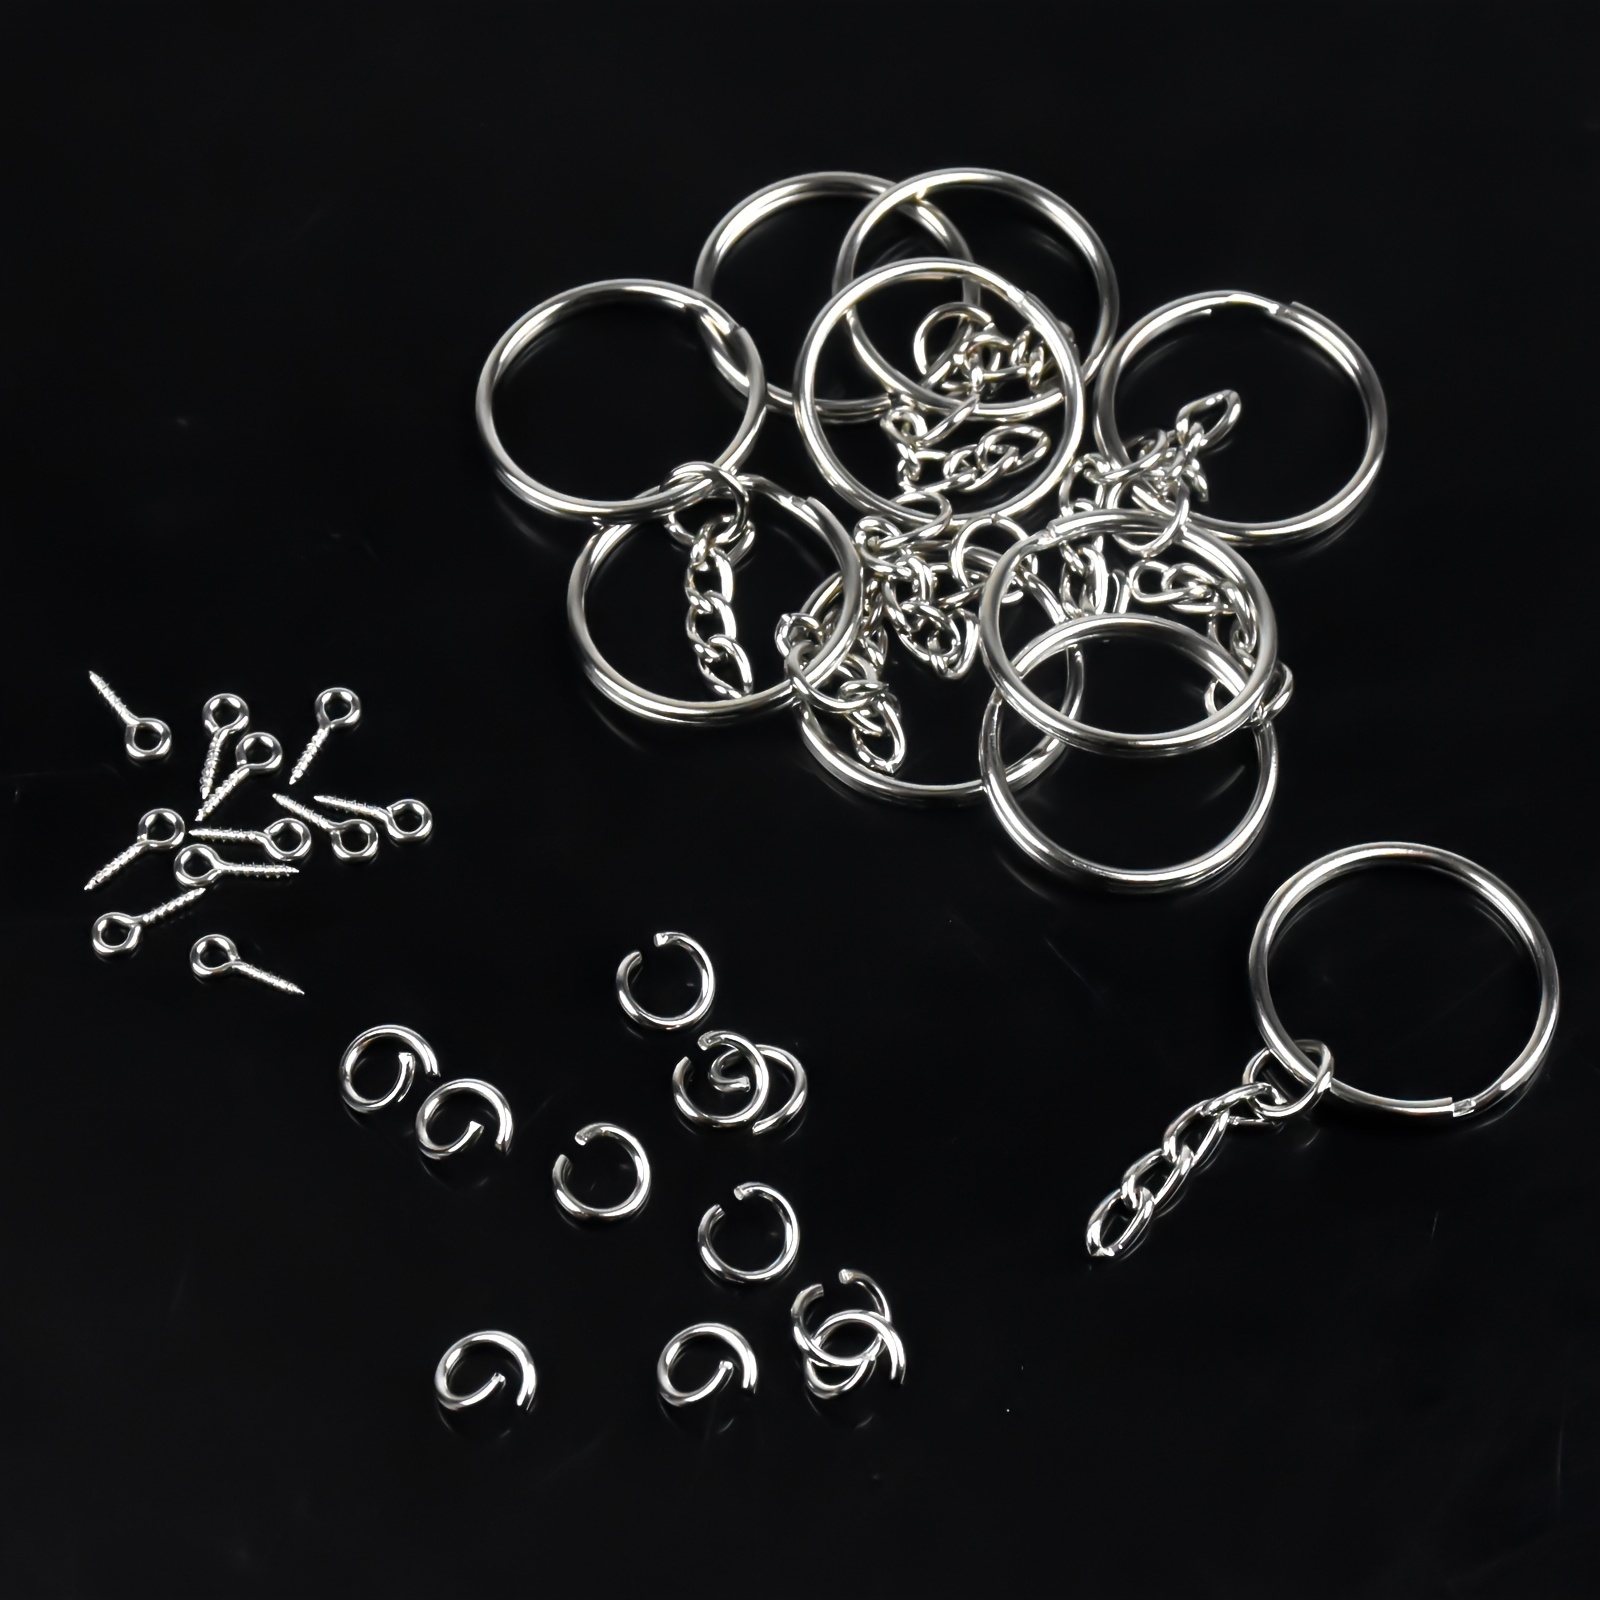 Mandala Crafts Double Split Rings for Keychains – Stainless Steel